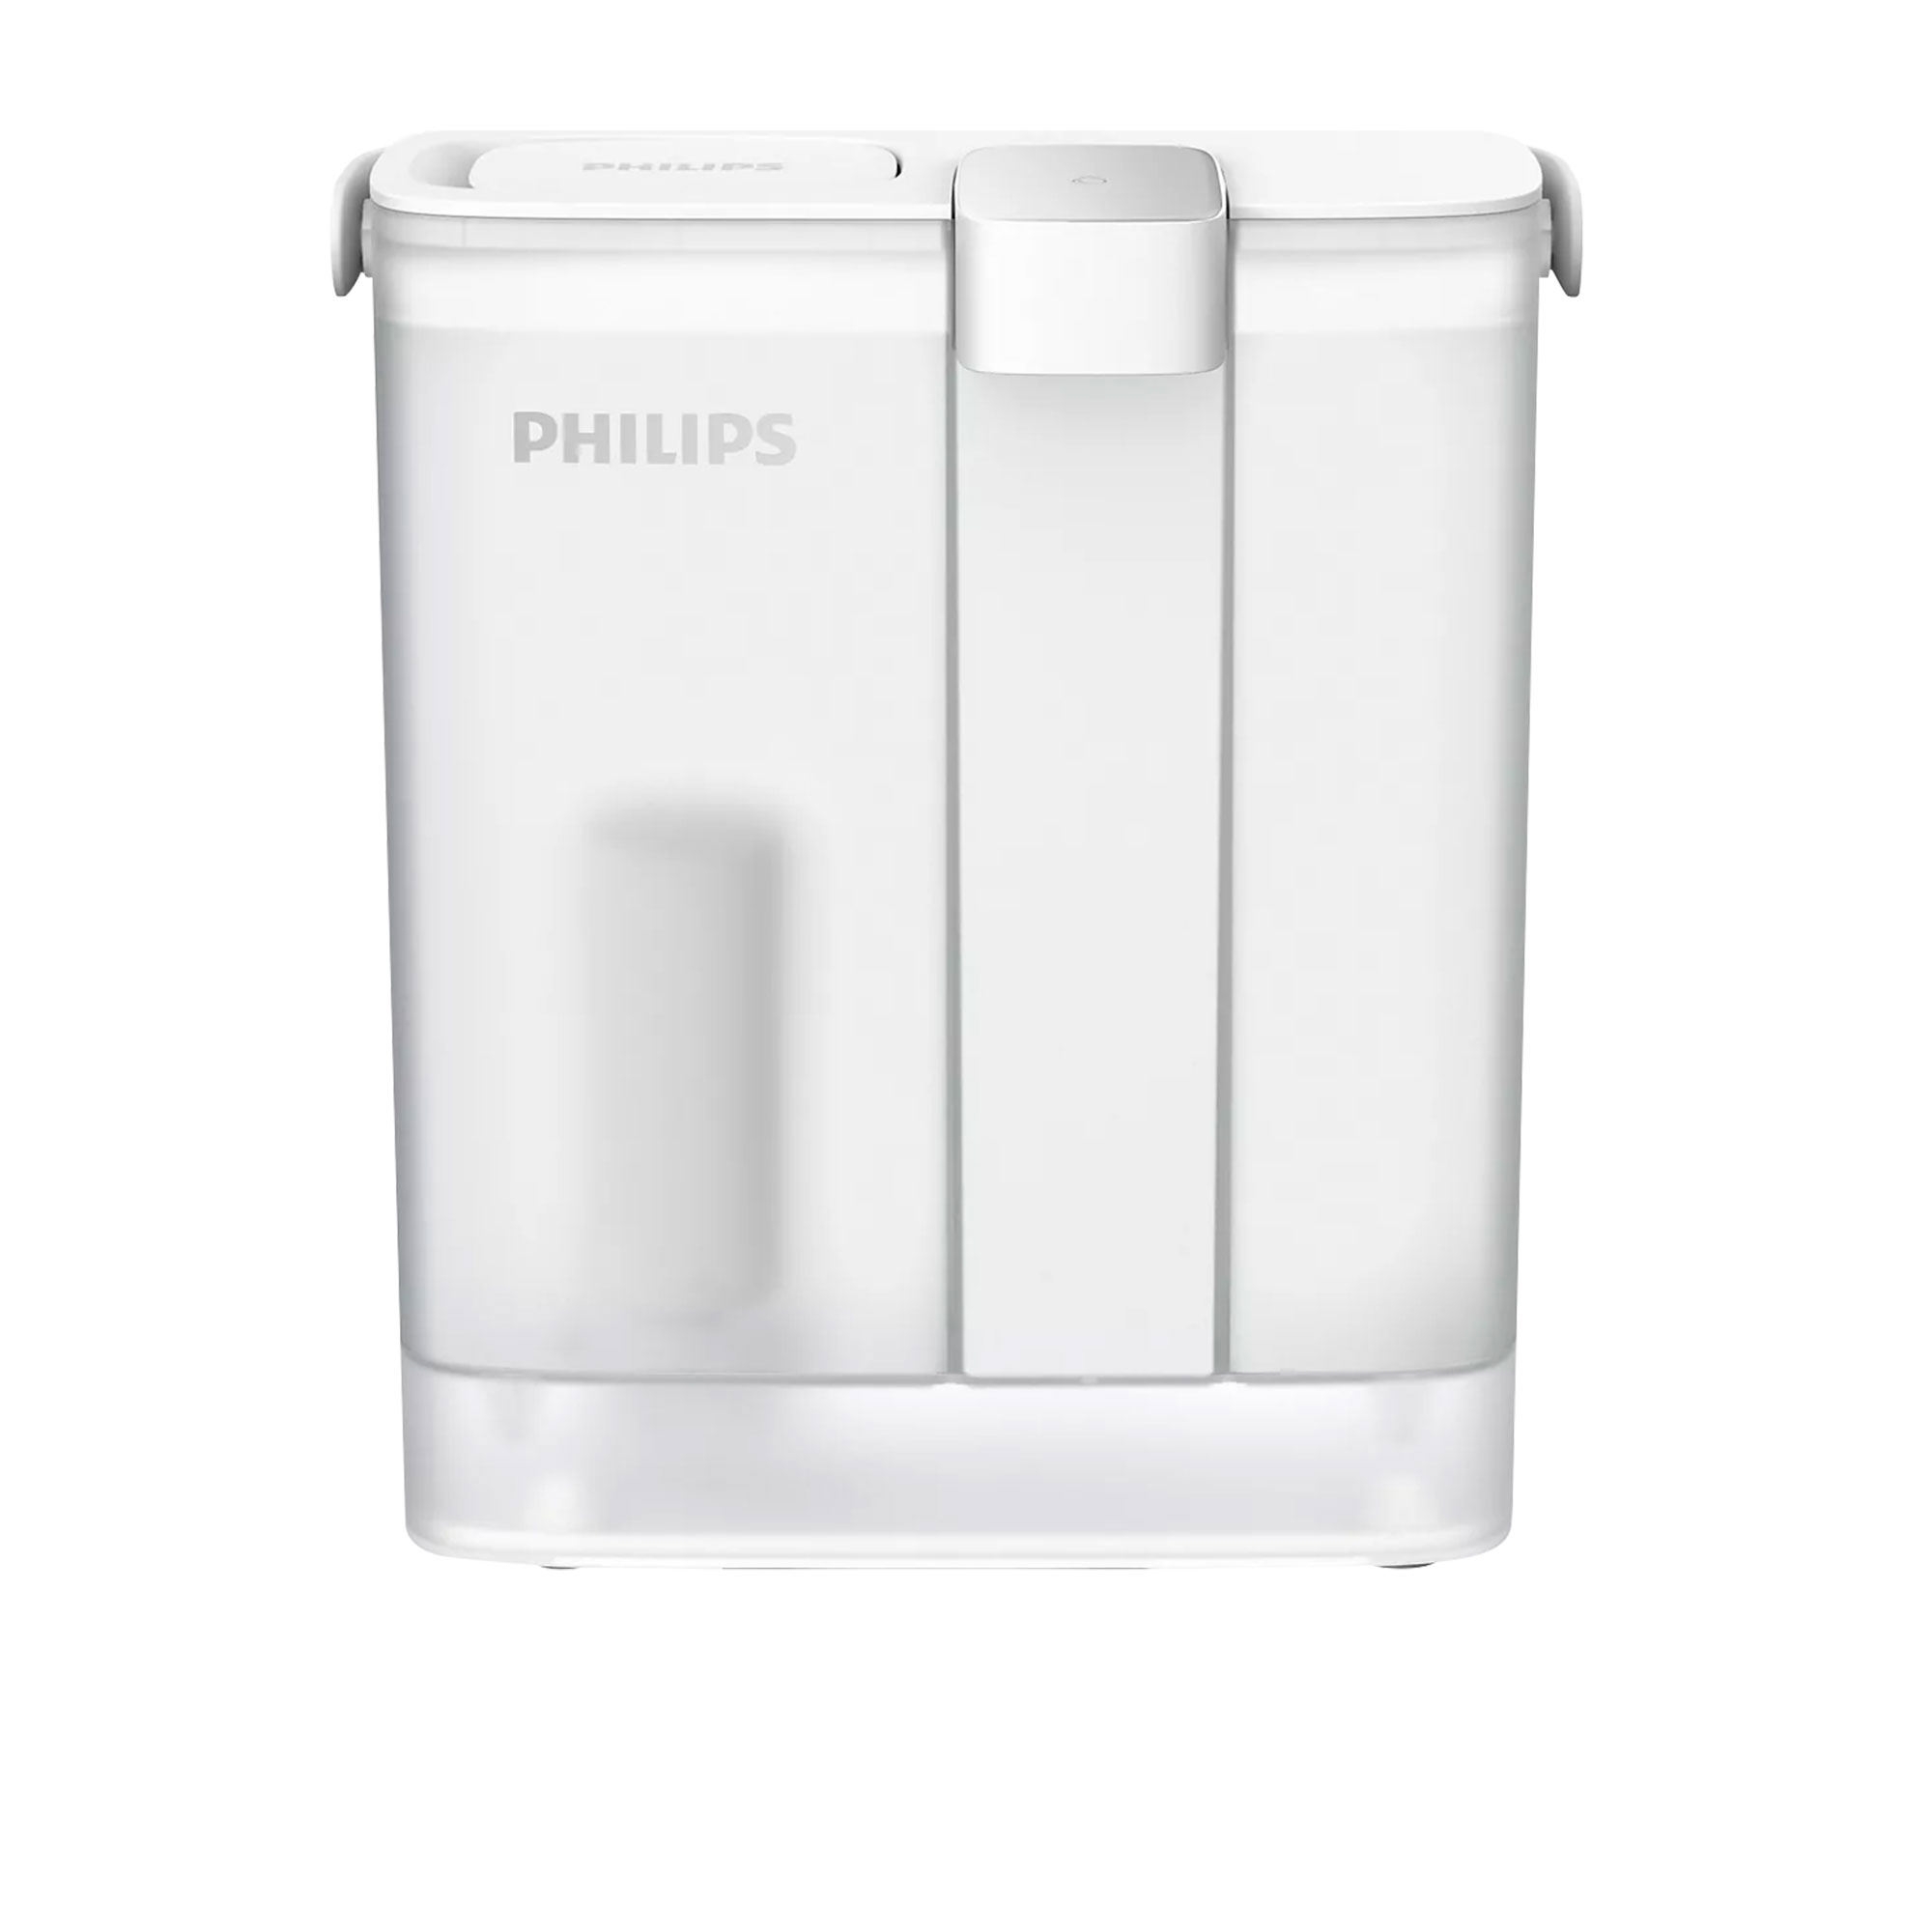 Philips AWP2980WH Instant Water Filtration Dispenser 3L Image 1